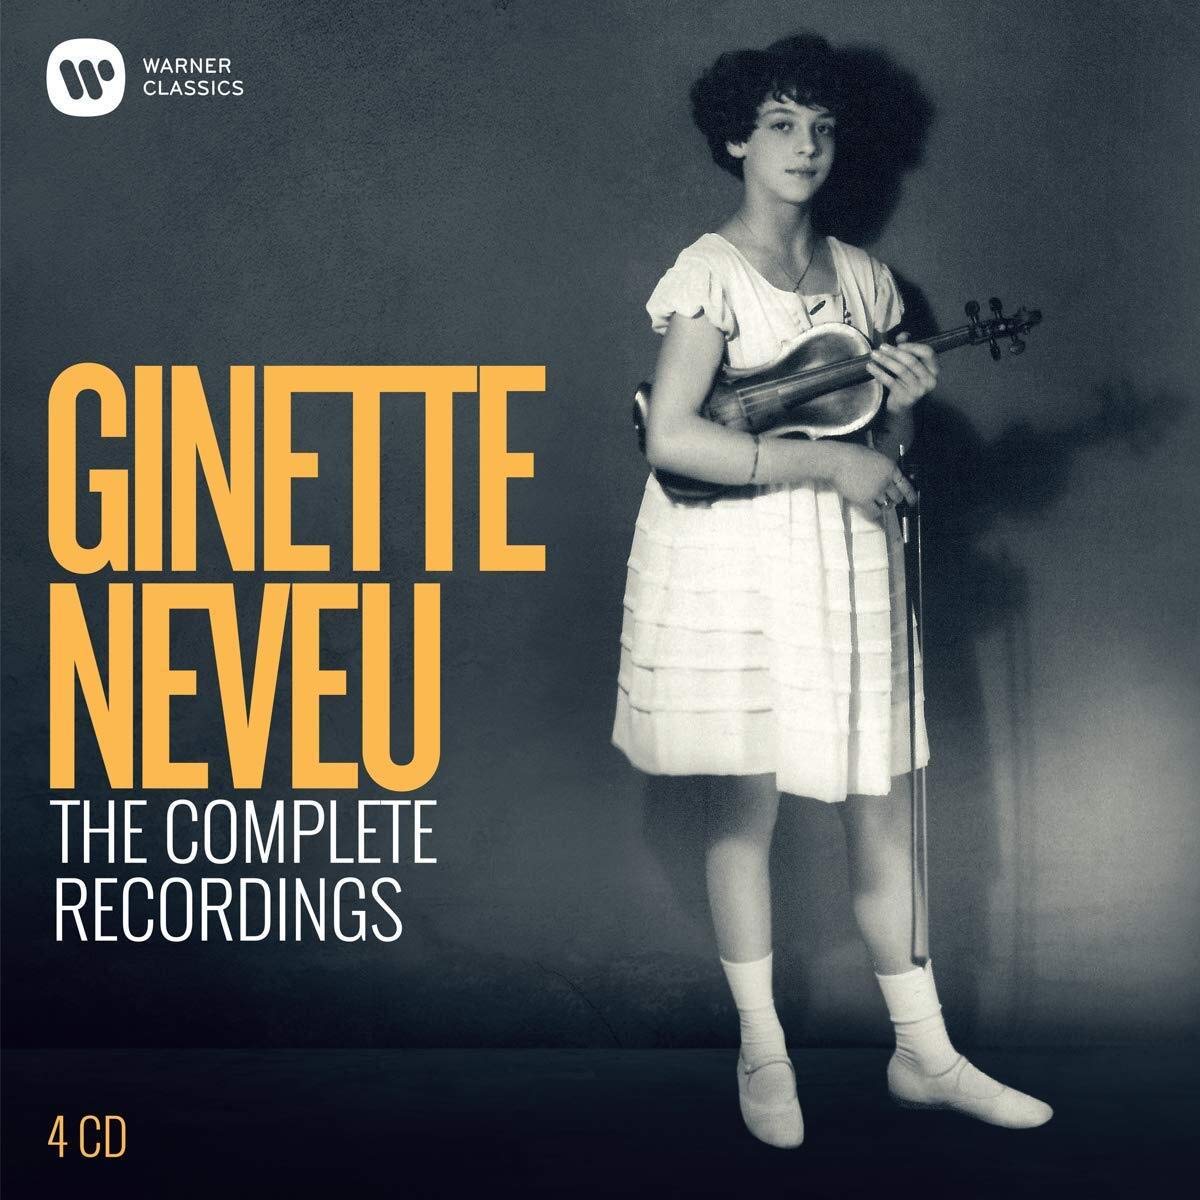 GINETTE NEVEU: THE COMPLETE RECORDINGS (4 CDS)